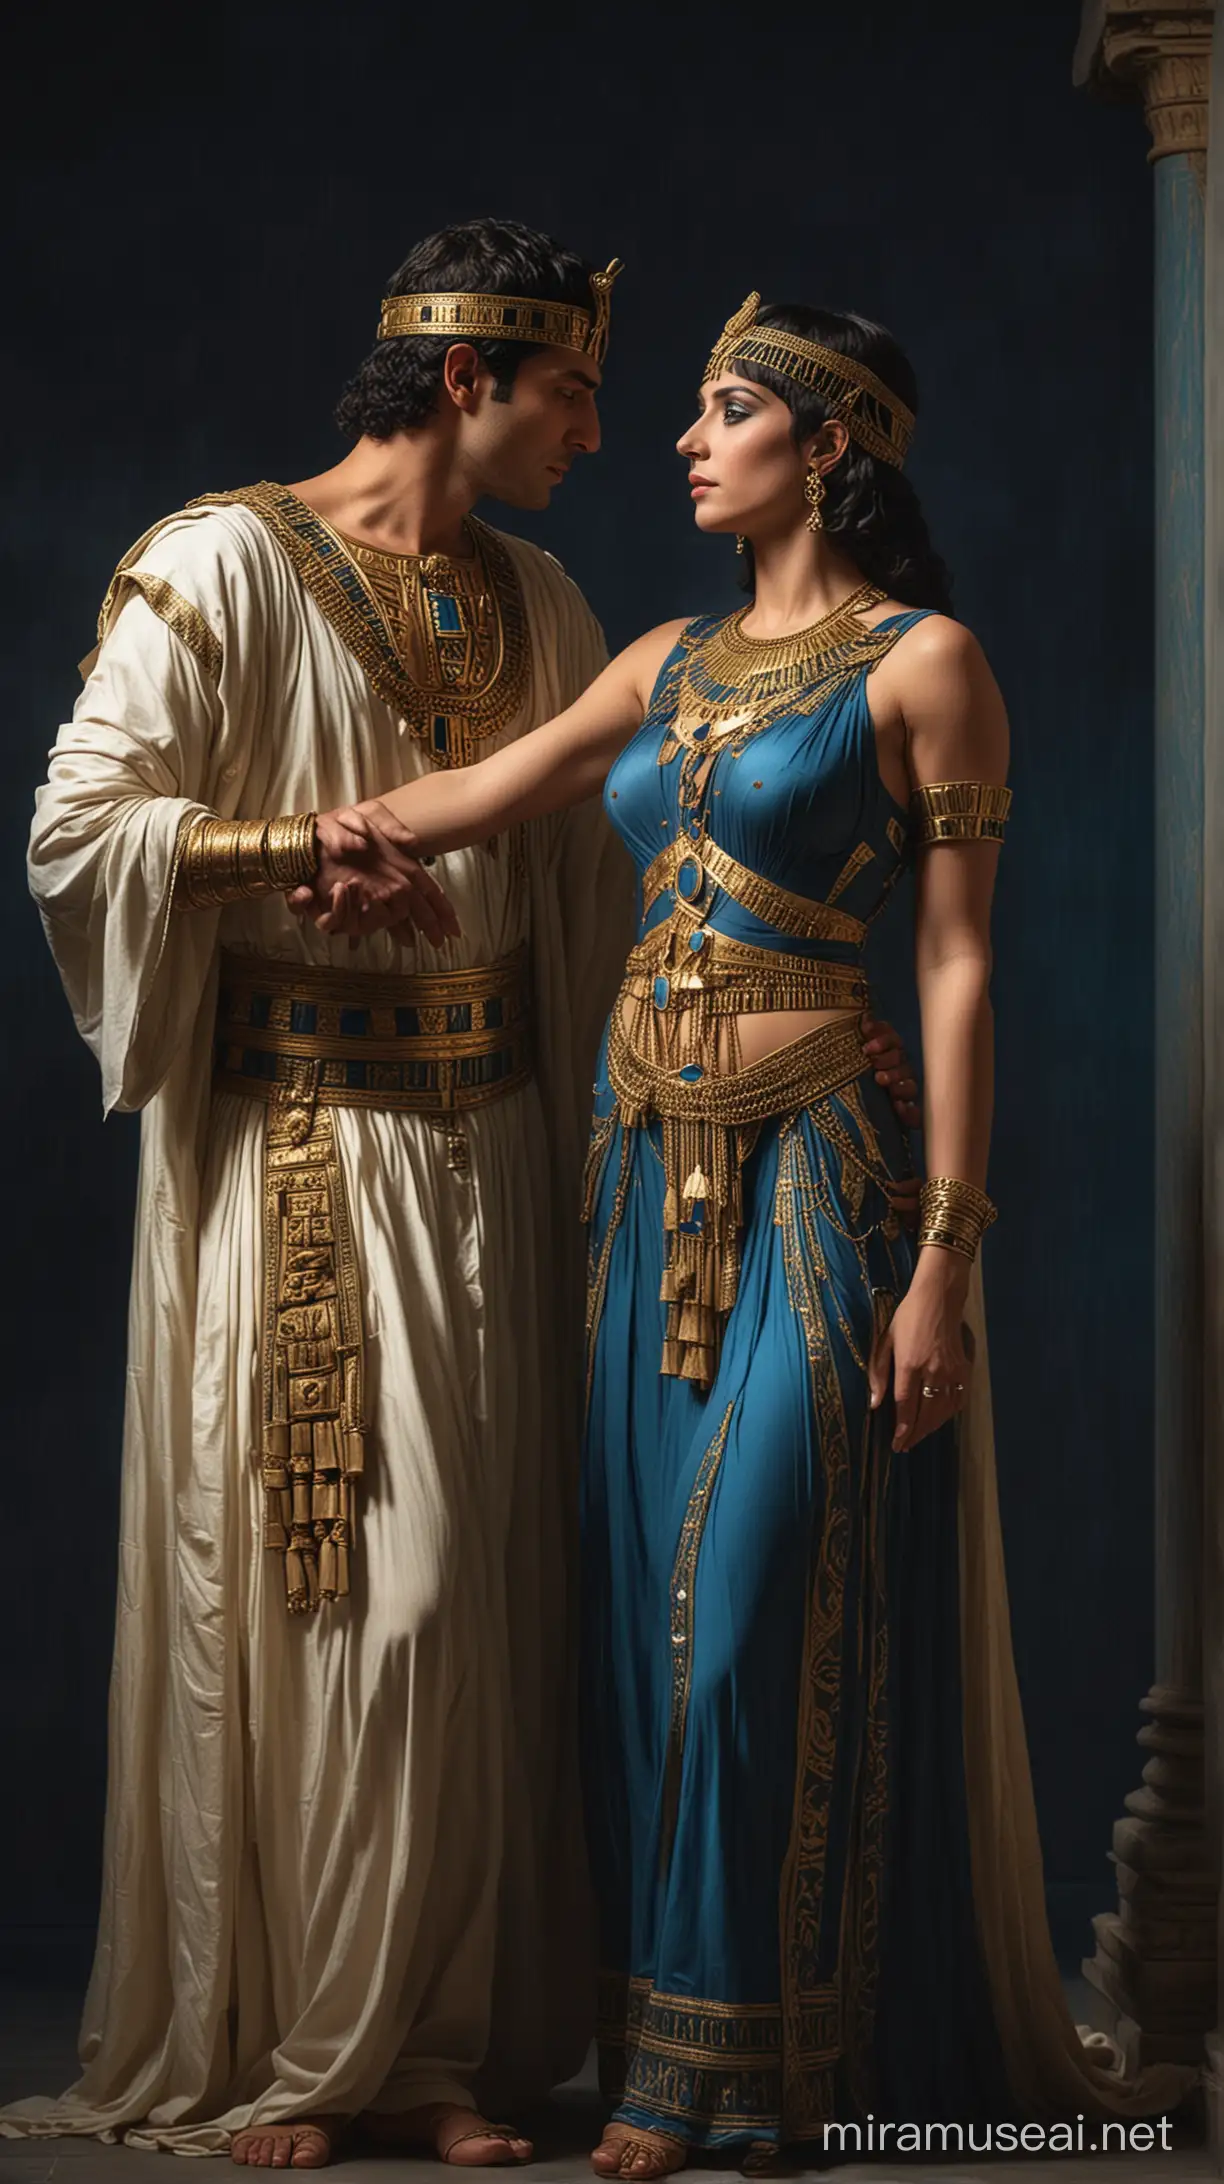 Cleopatra Embraced by Two Suave Gentlemen in Luxurious Garb